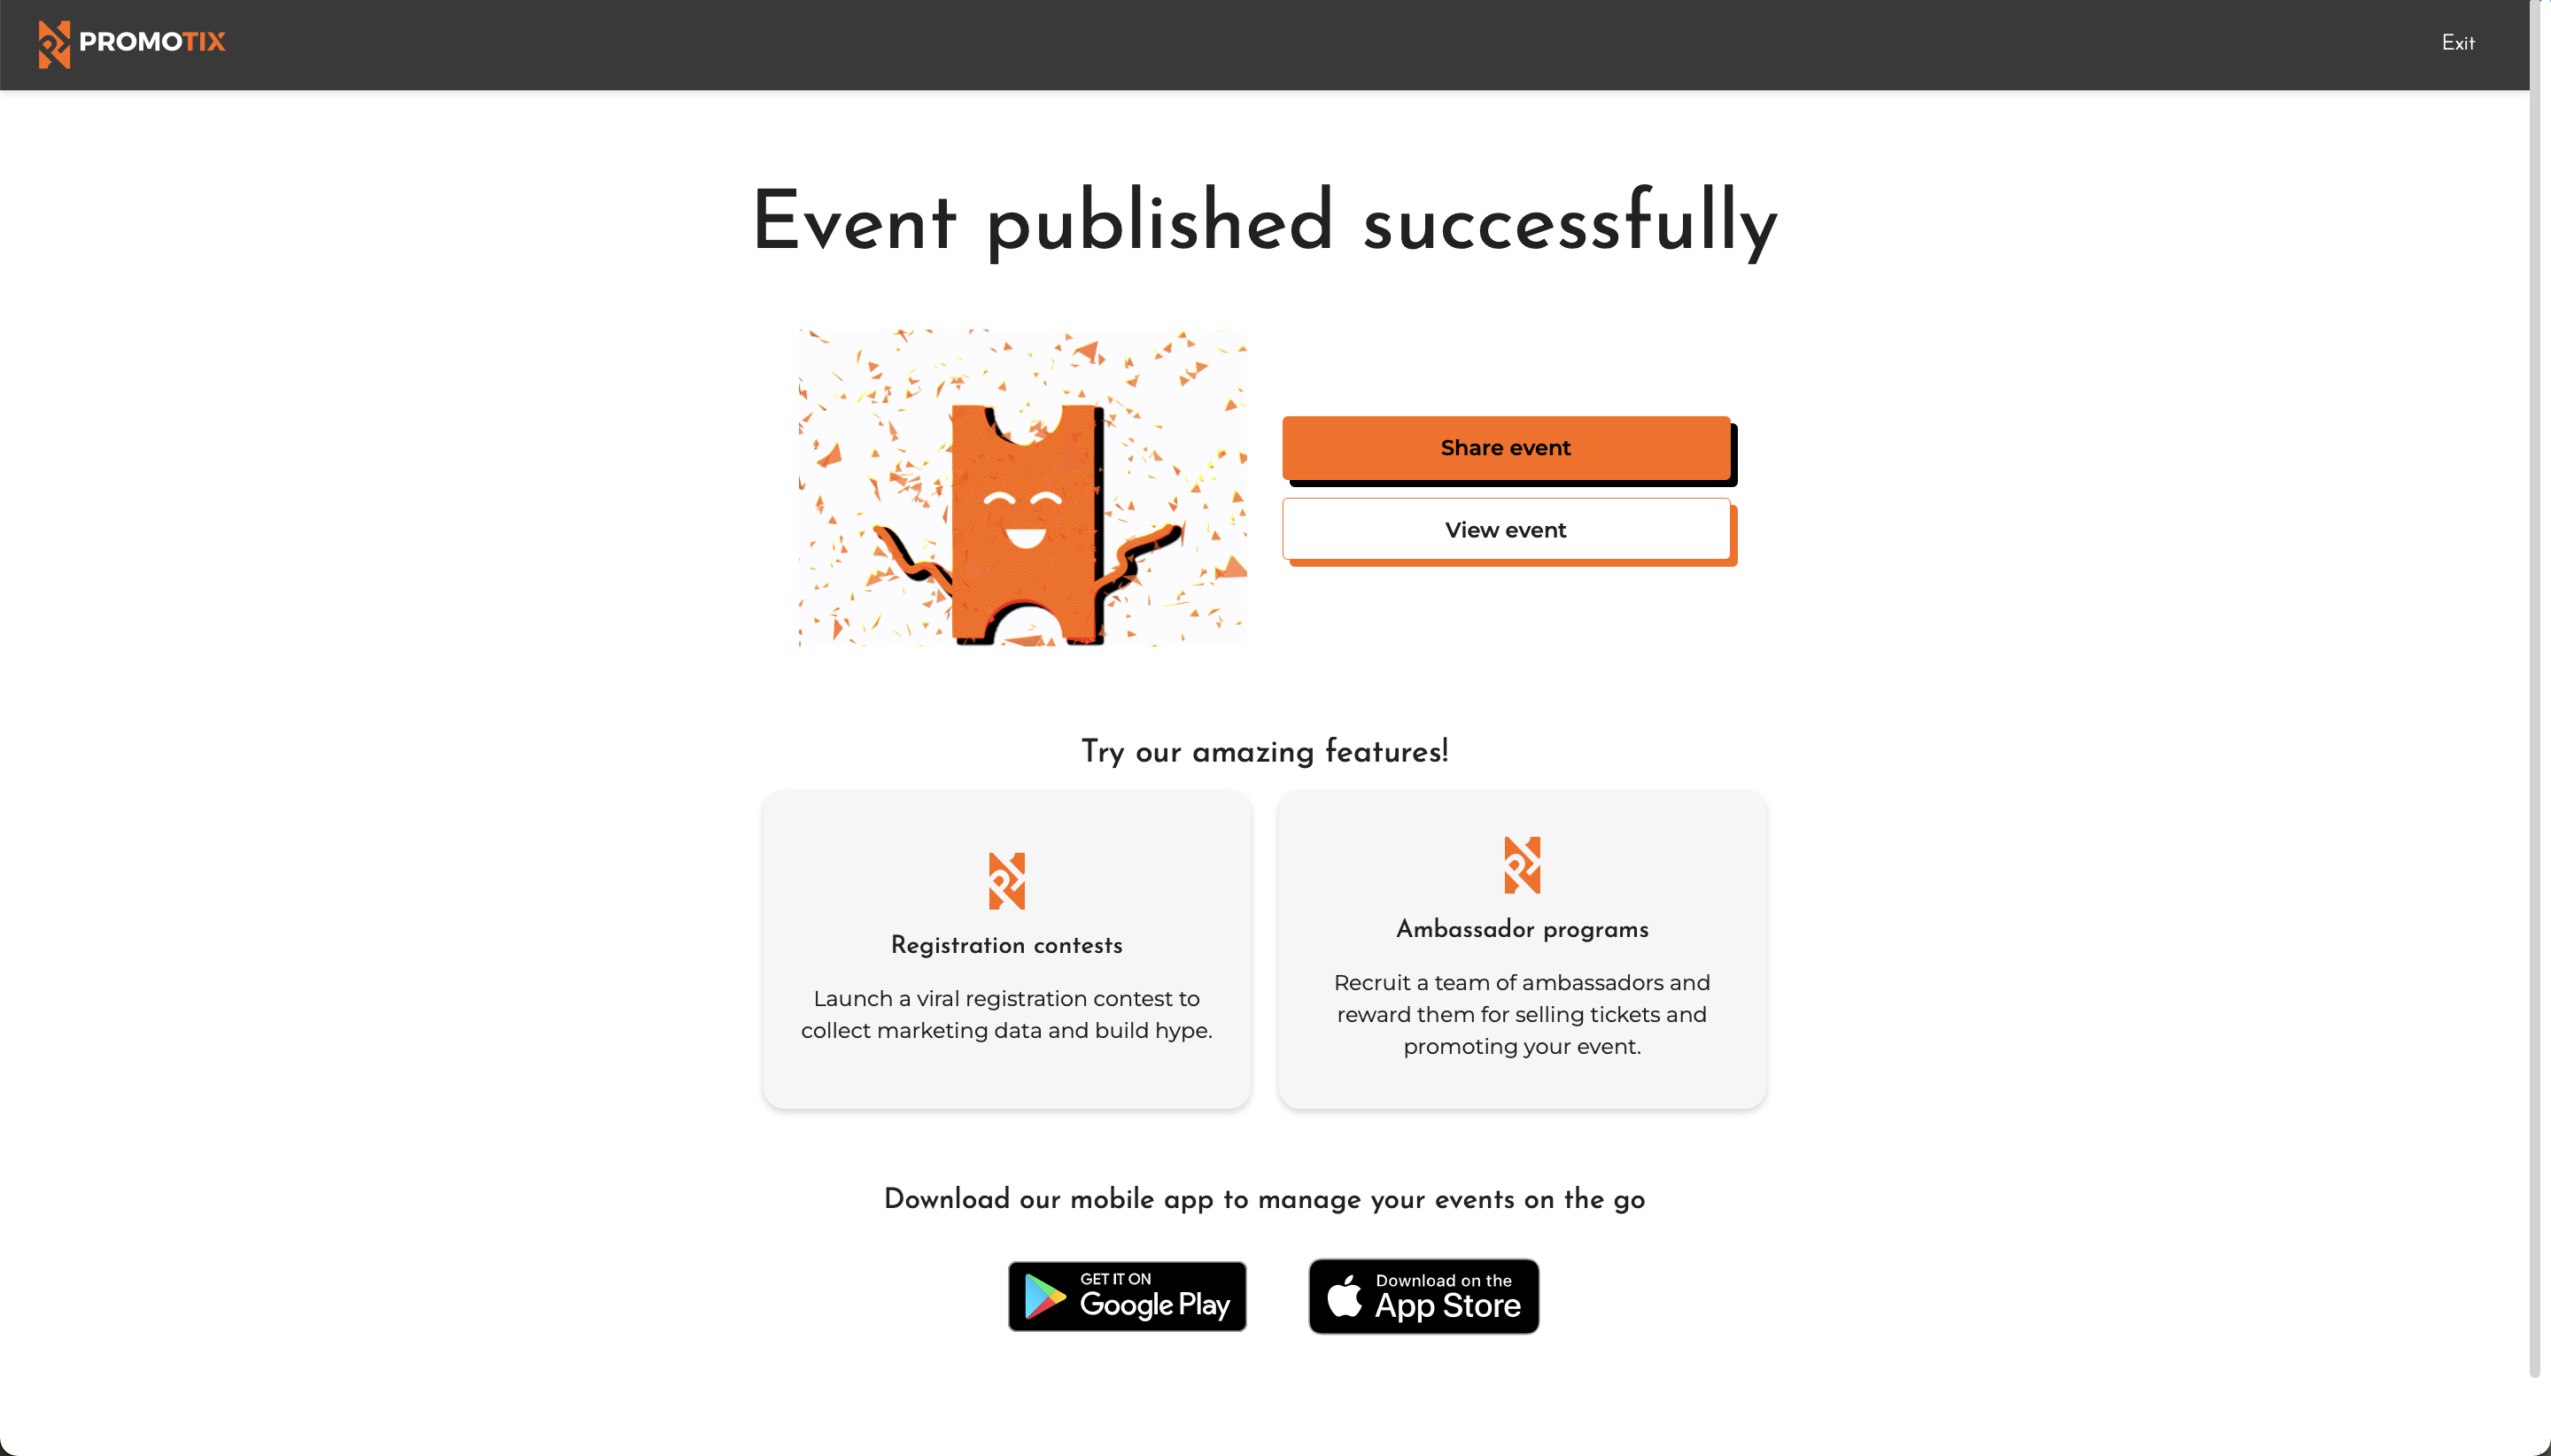 PromoTix Event Published Successfully